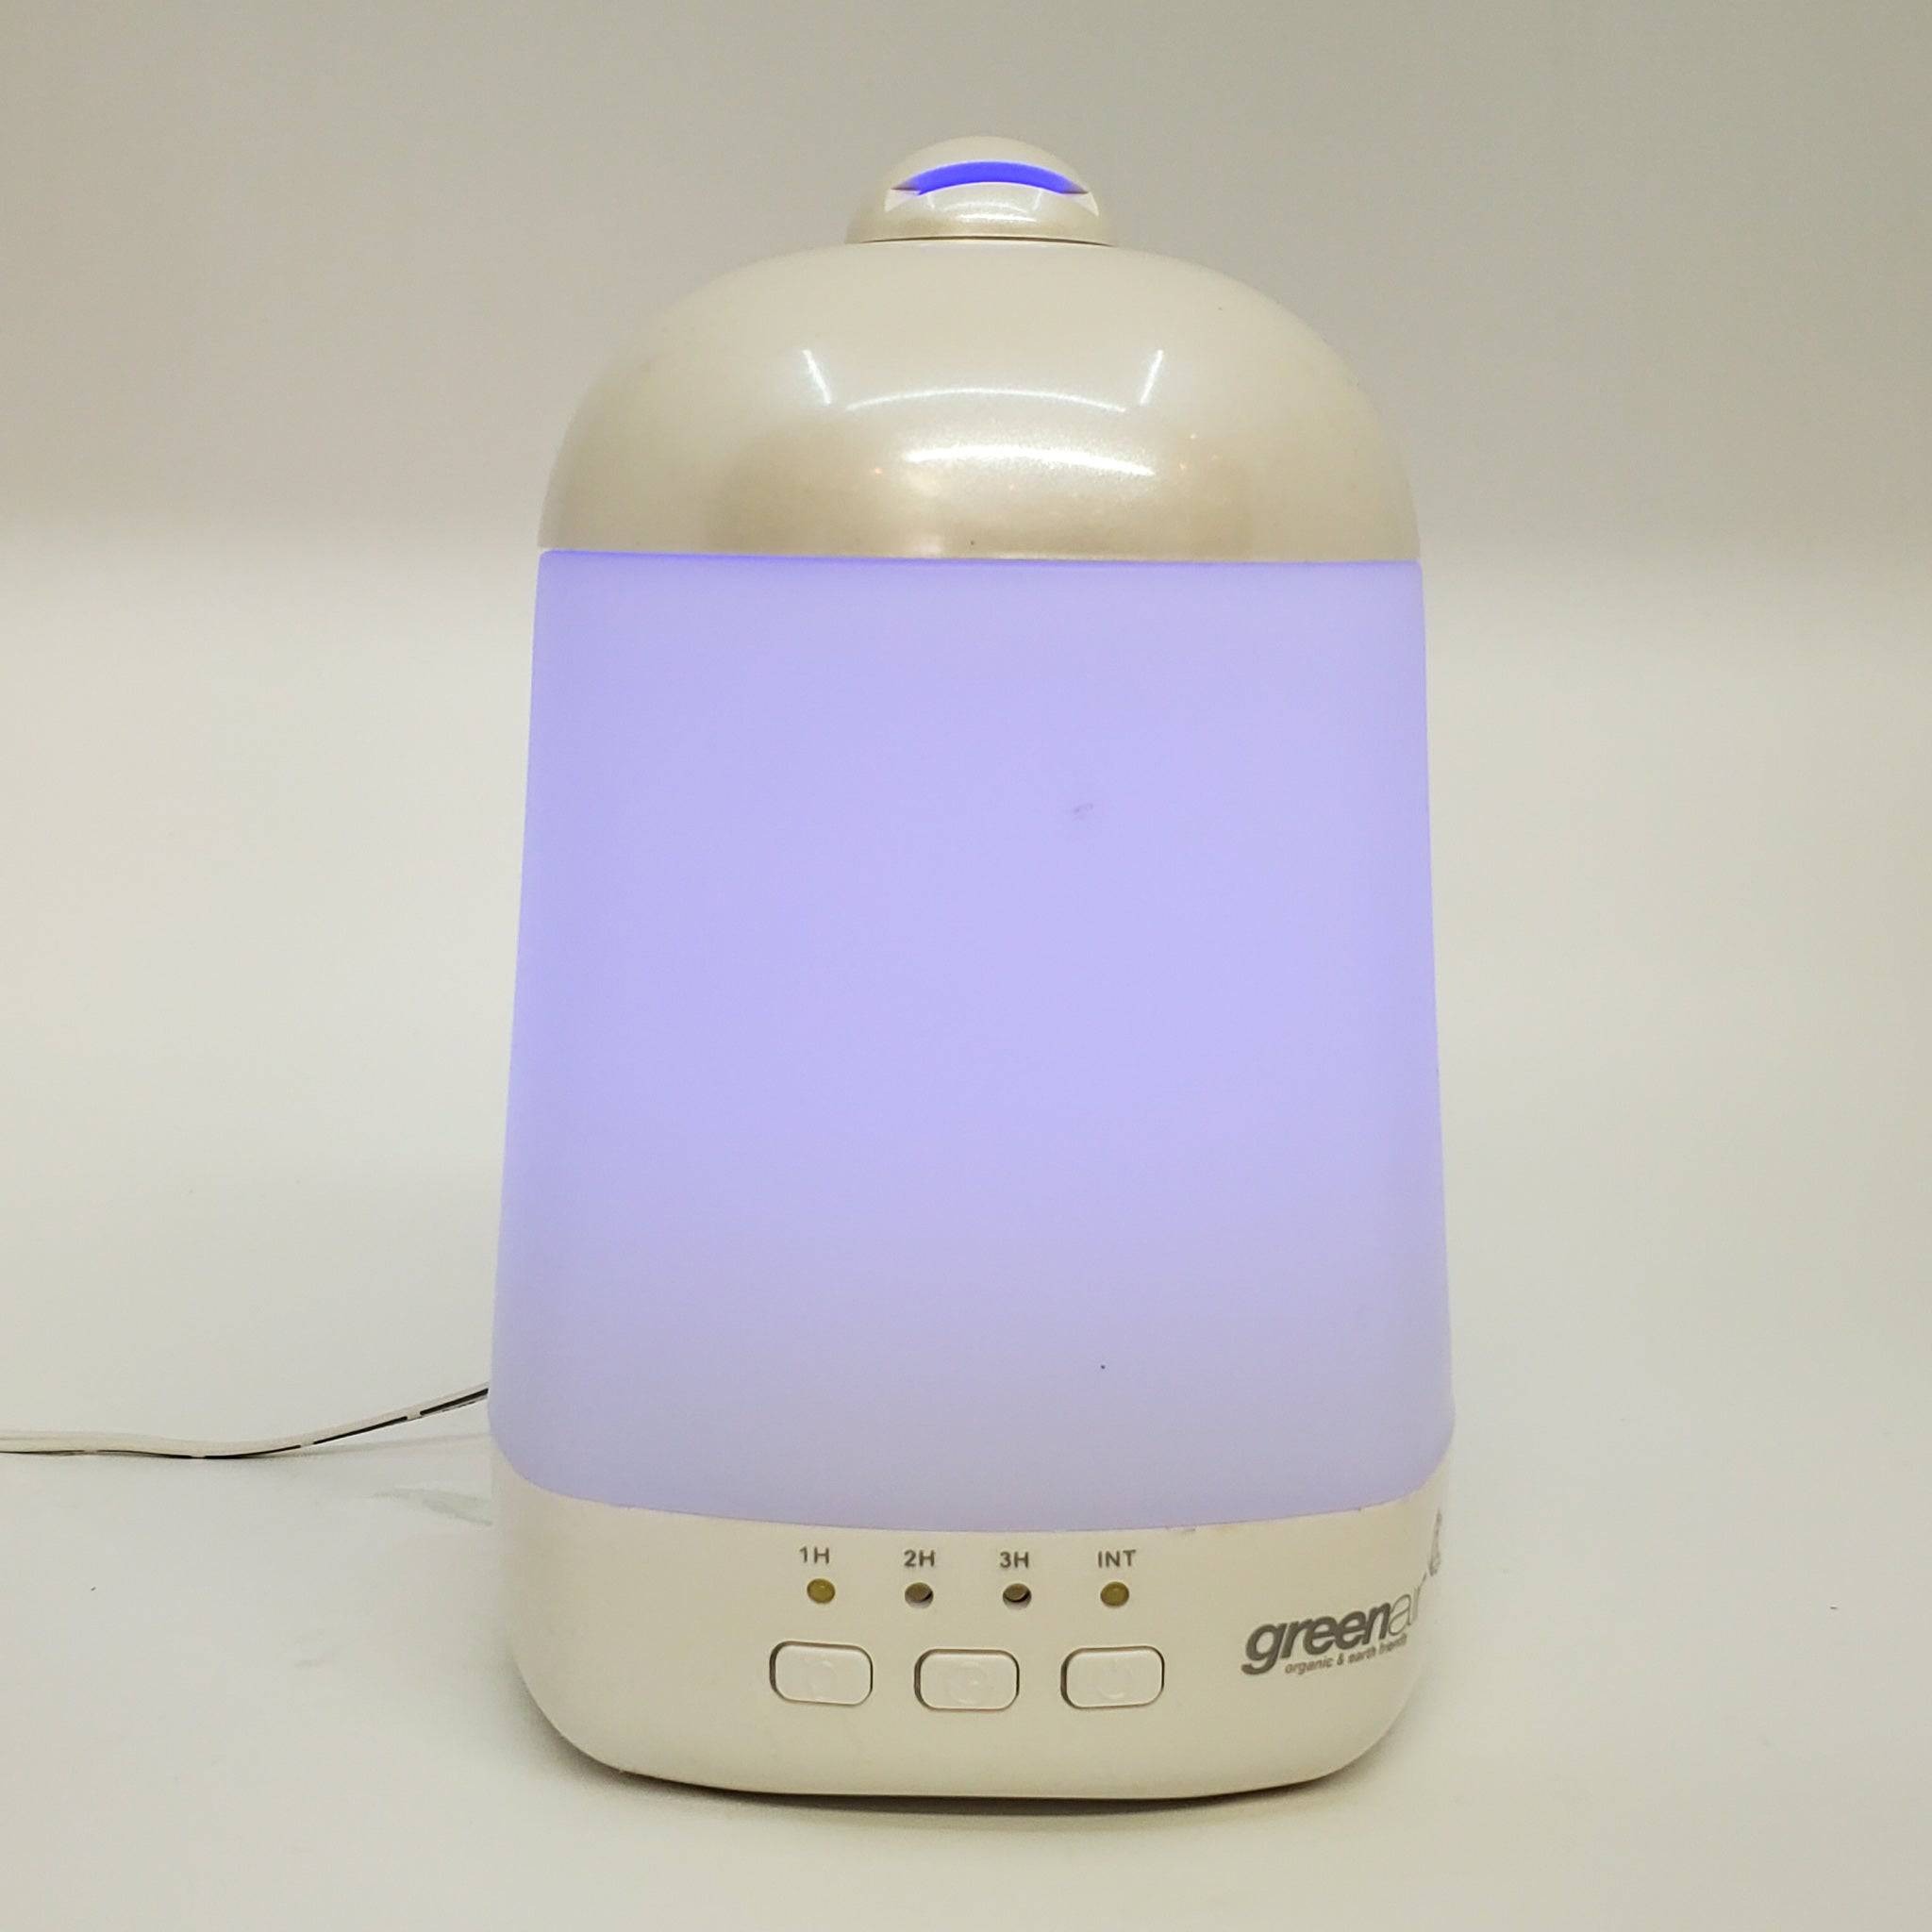 SpaVapor 2.0 Essential Oil Diffuser - The Mockingbird Apothecary & General Store